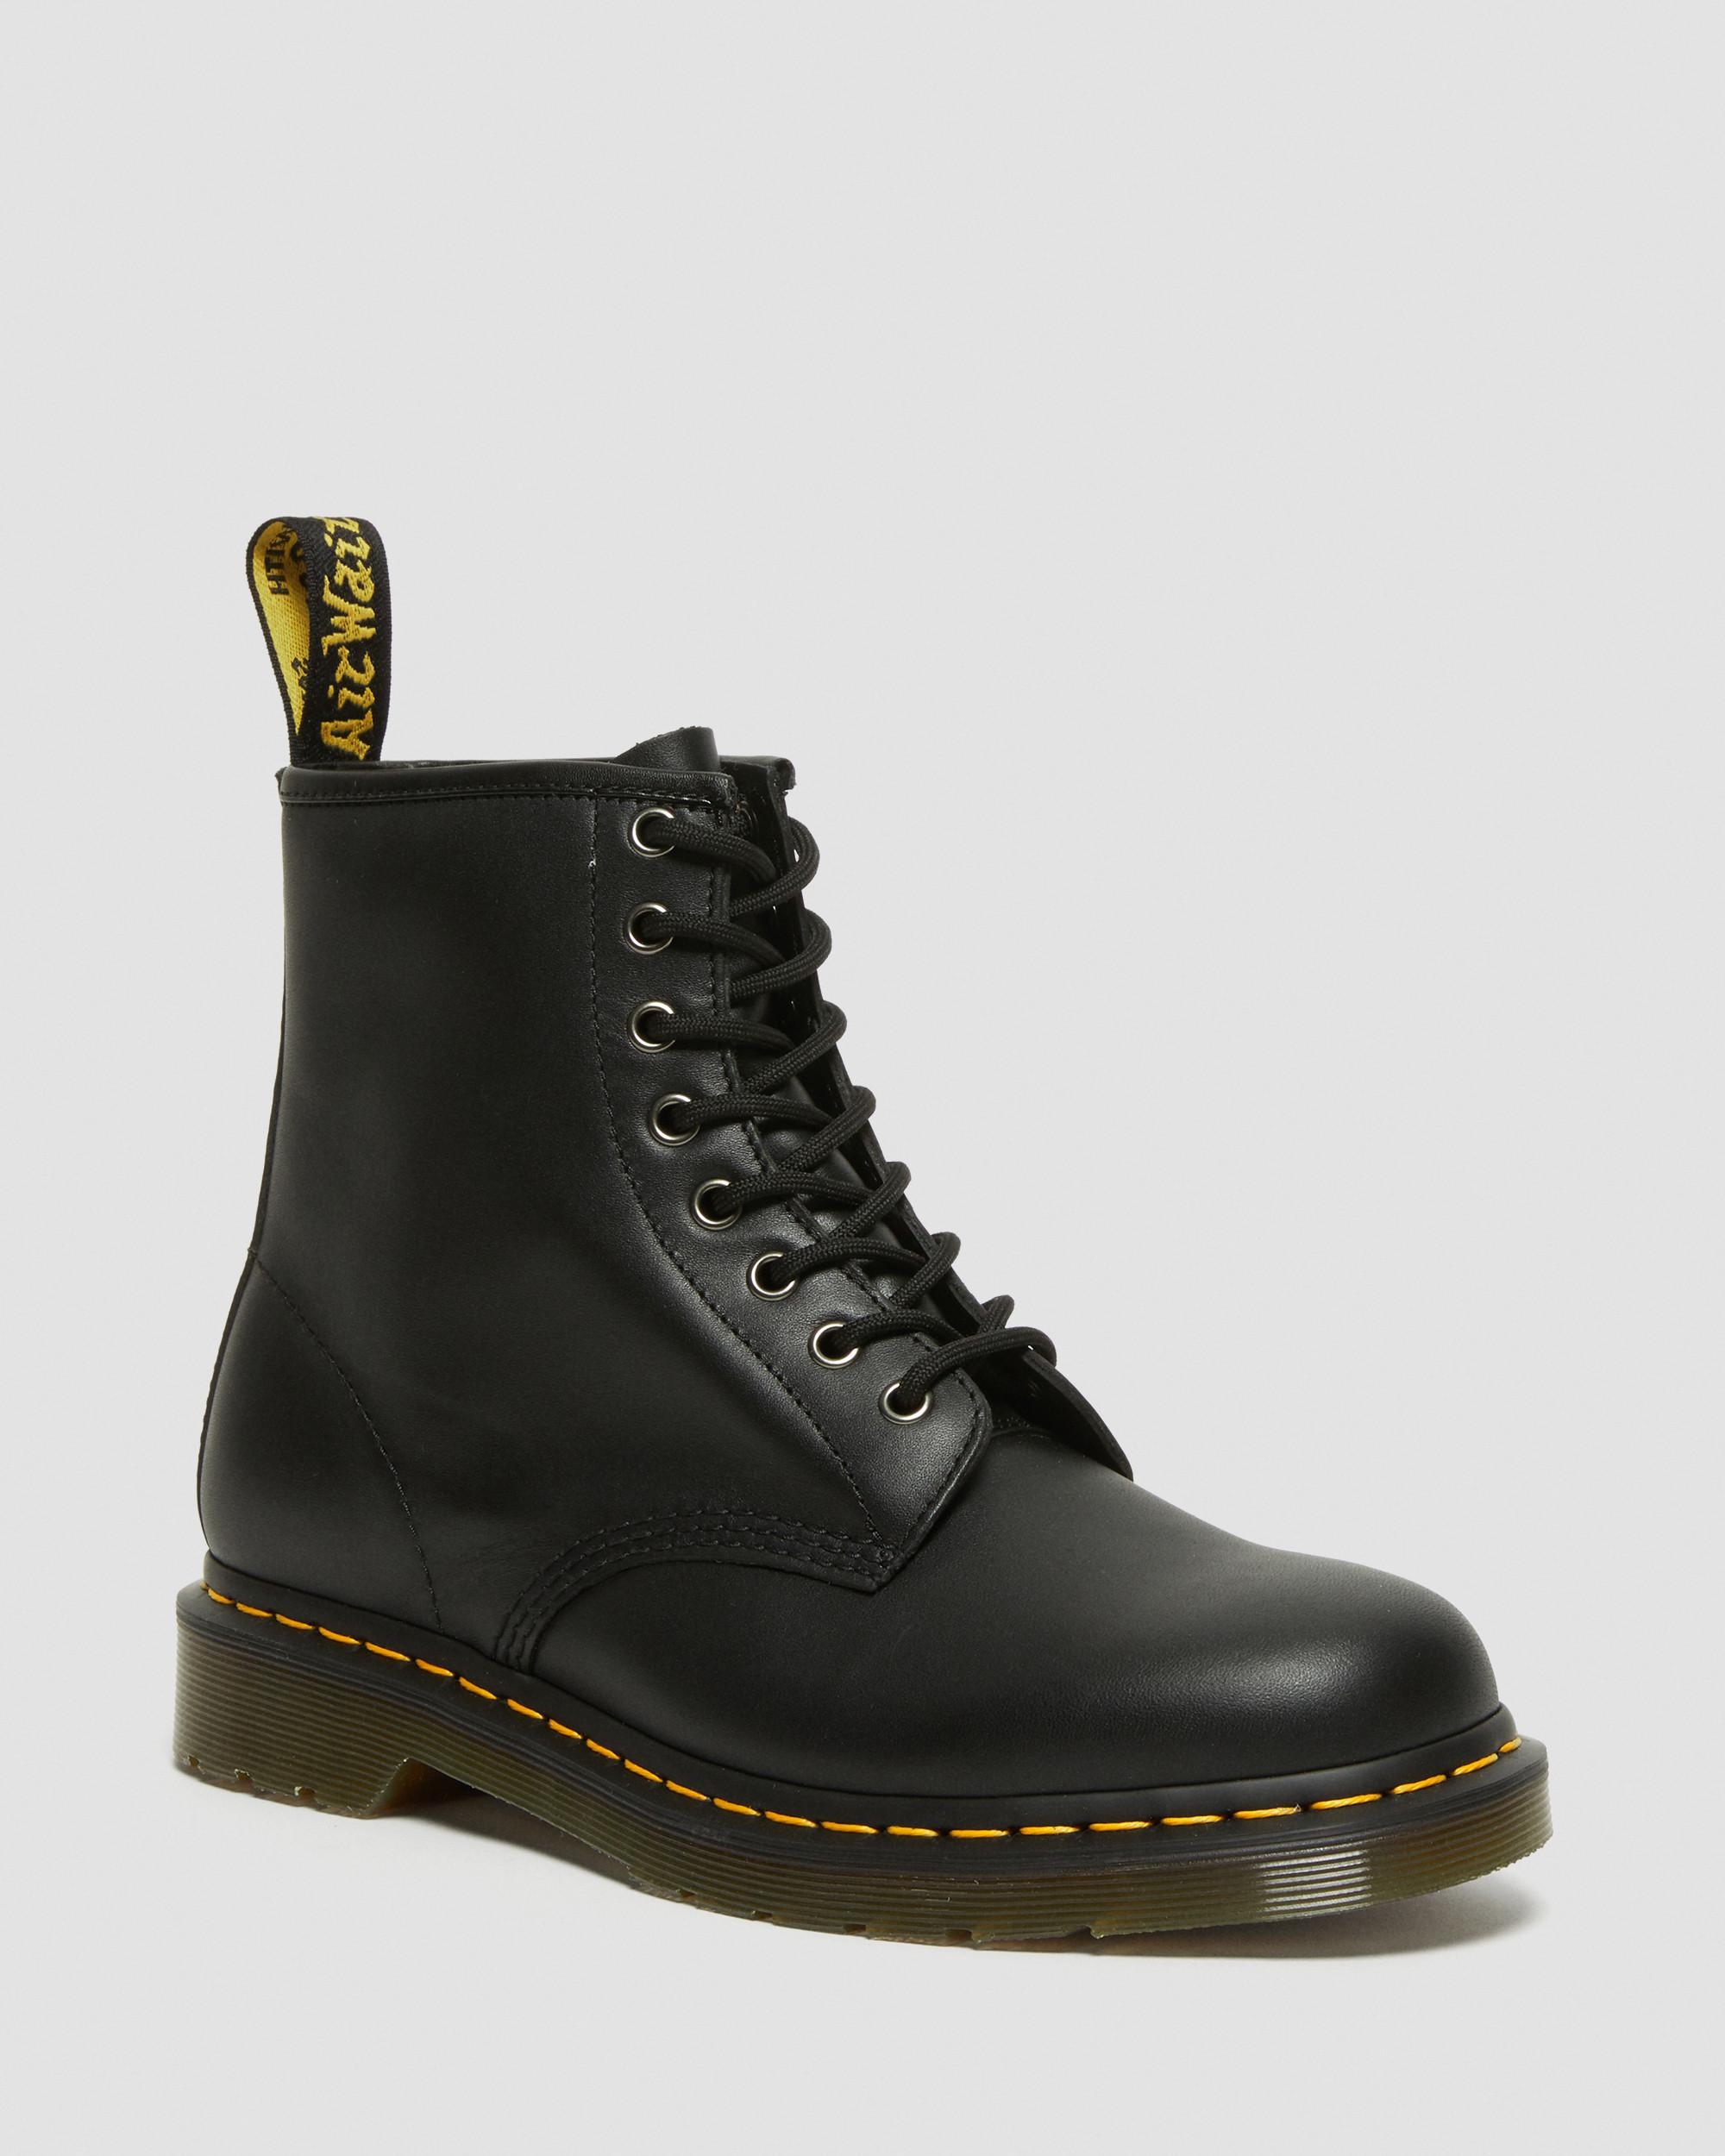 who invented doc martens